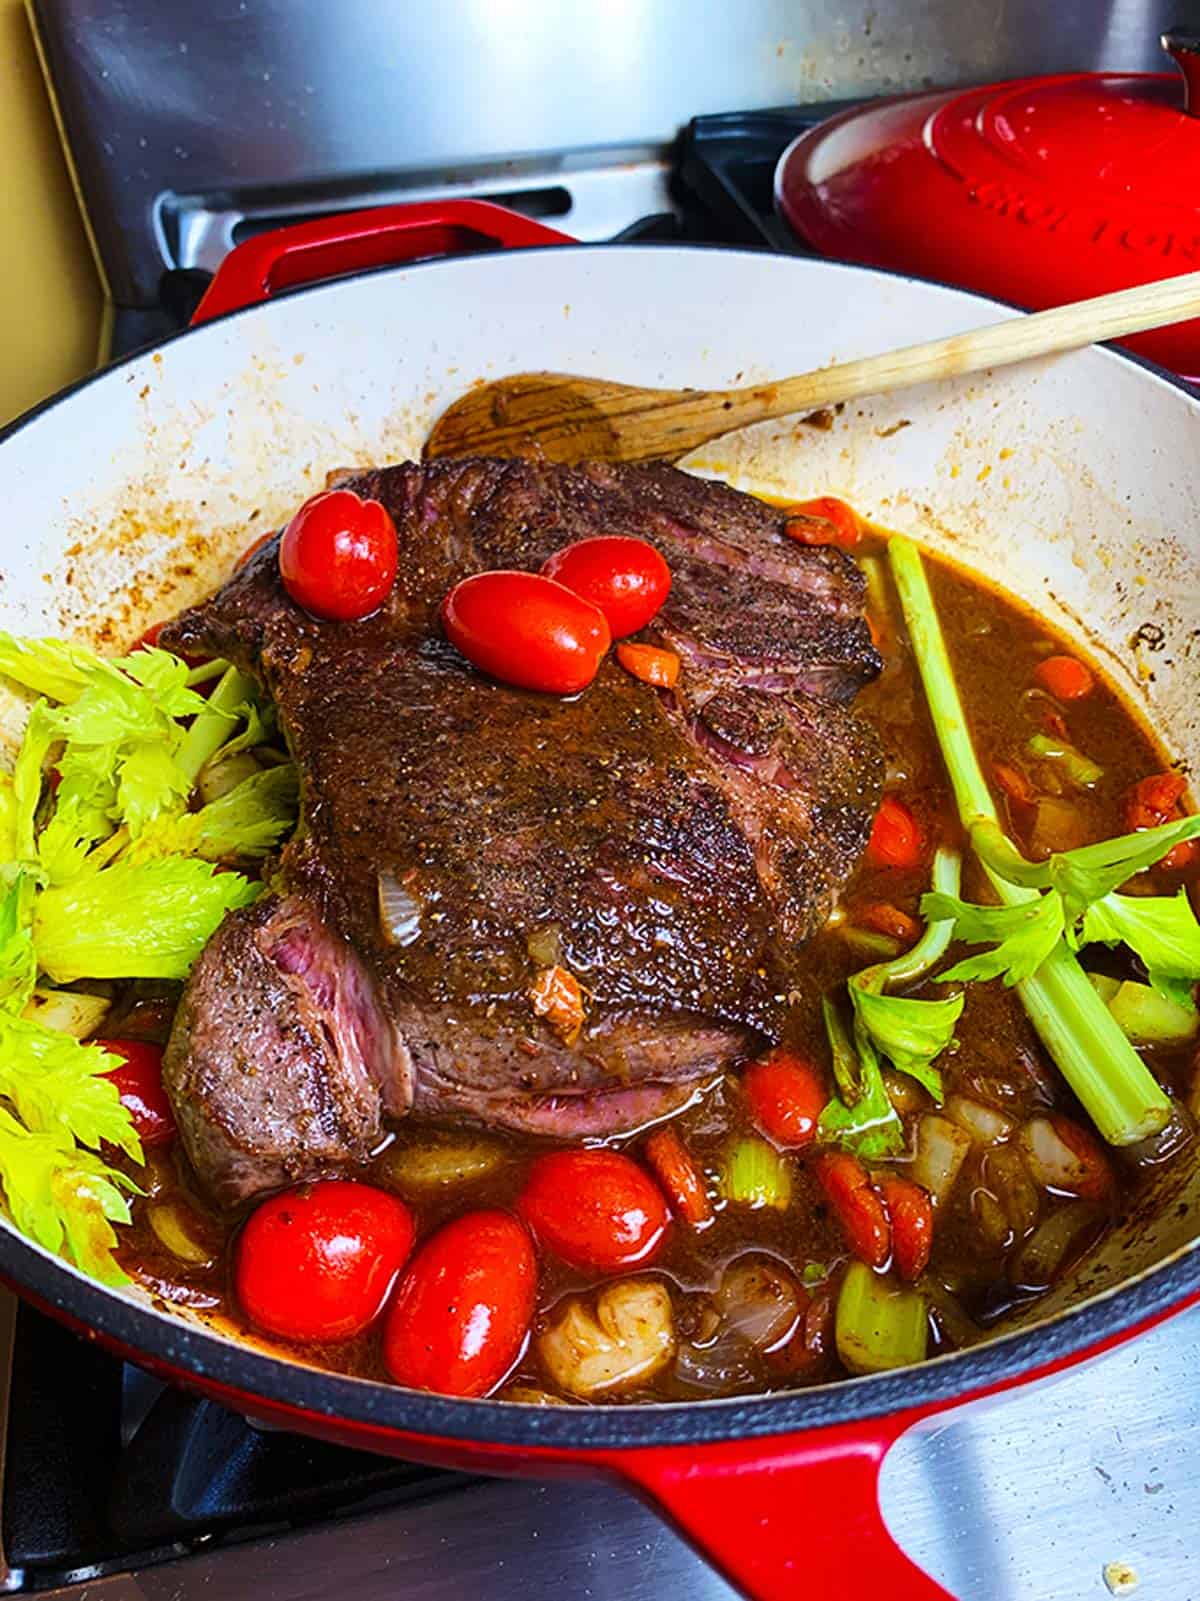 A chunk of beef in a large skillet with sauce and vegetables.